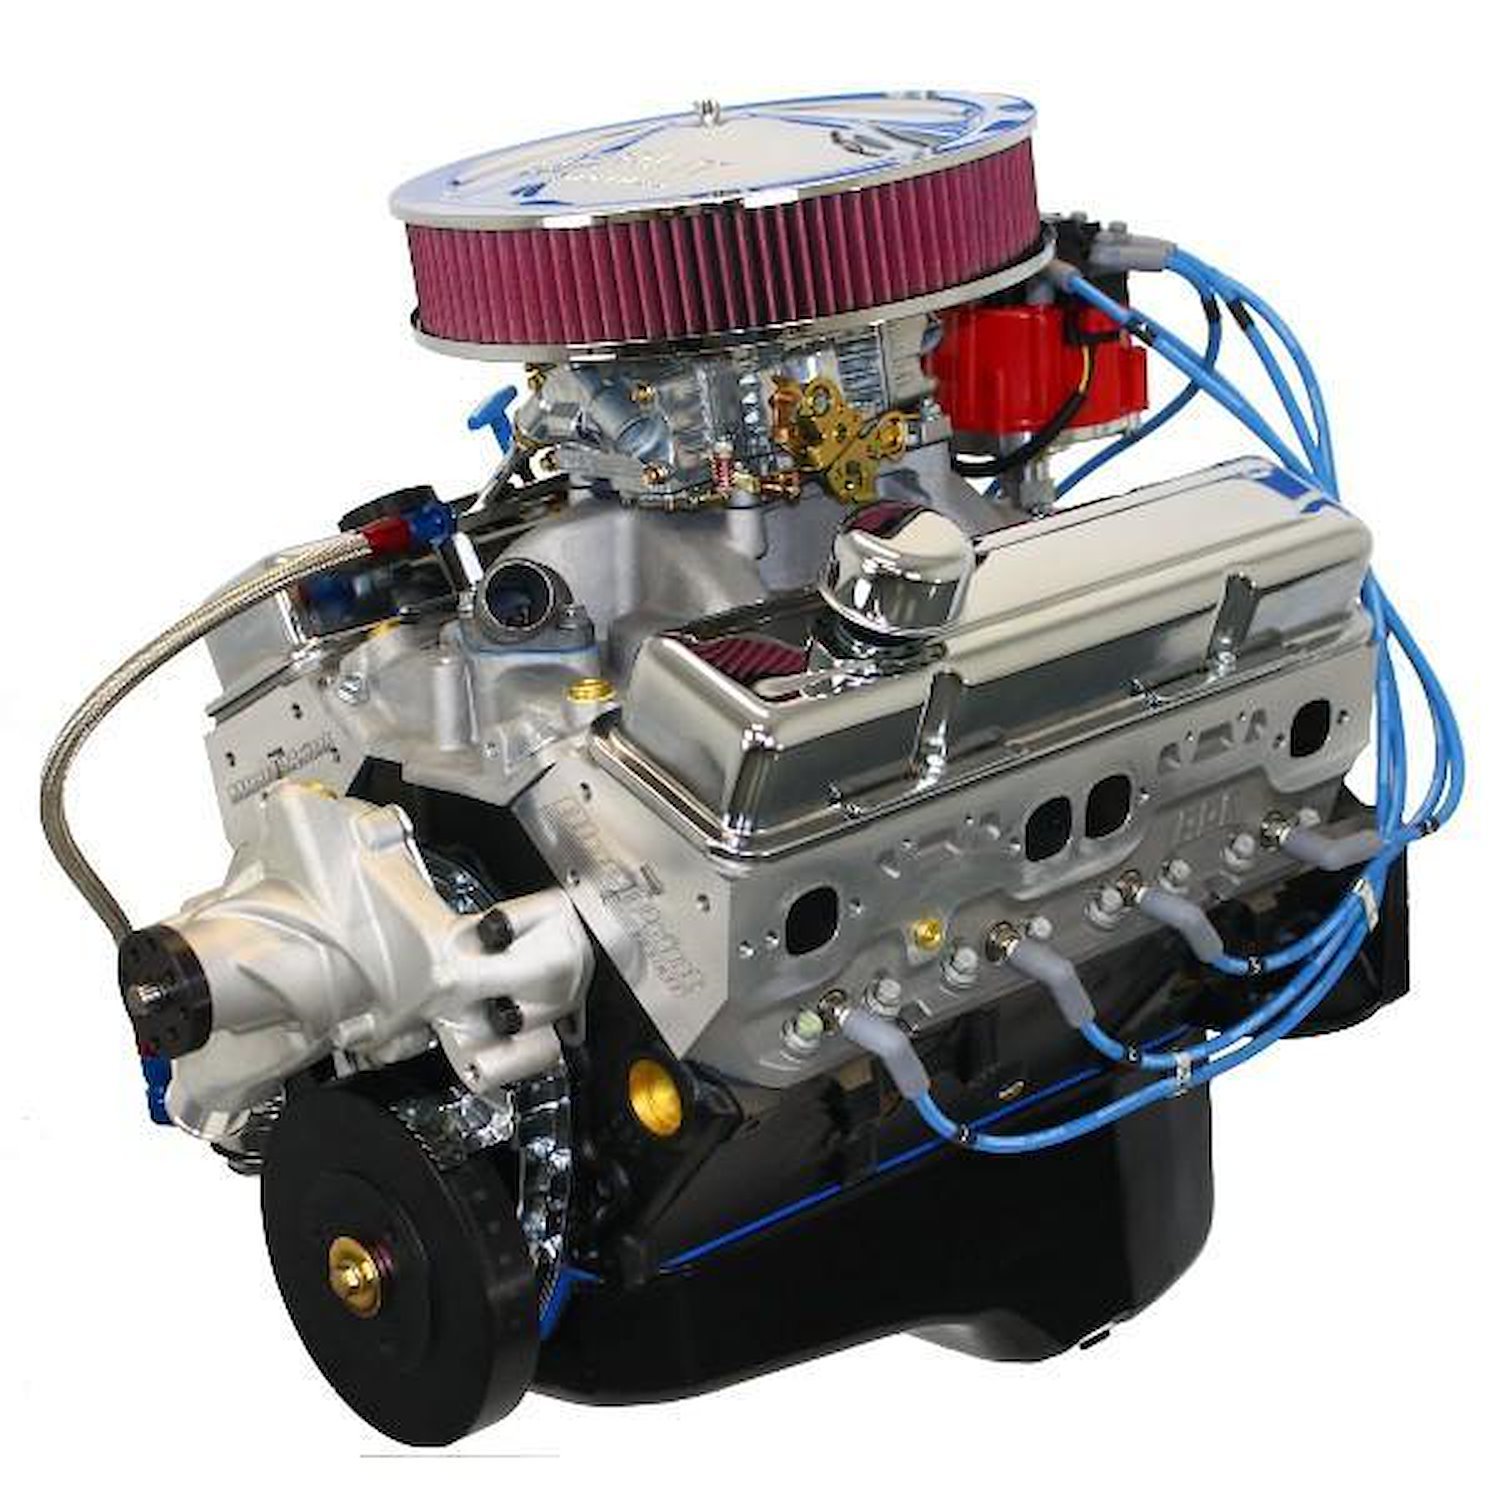 New Block Casting 350 ci Cruiser Crate Engine [Fuel Injected / Drop-In Ready]